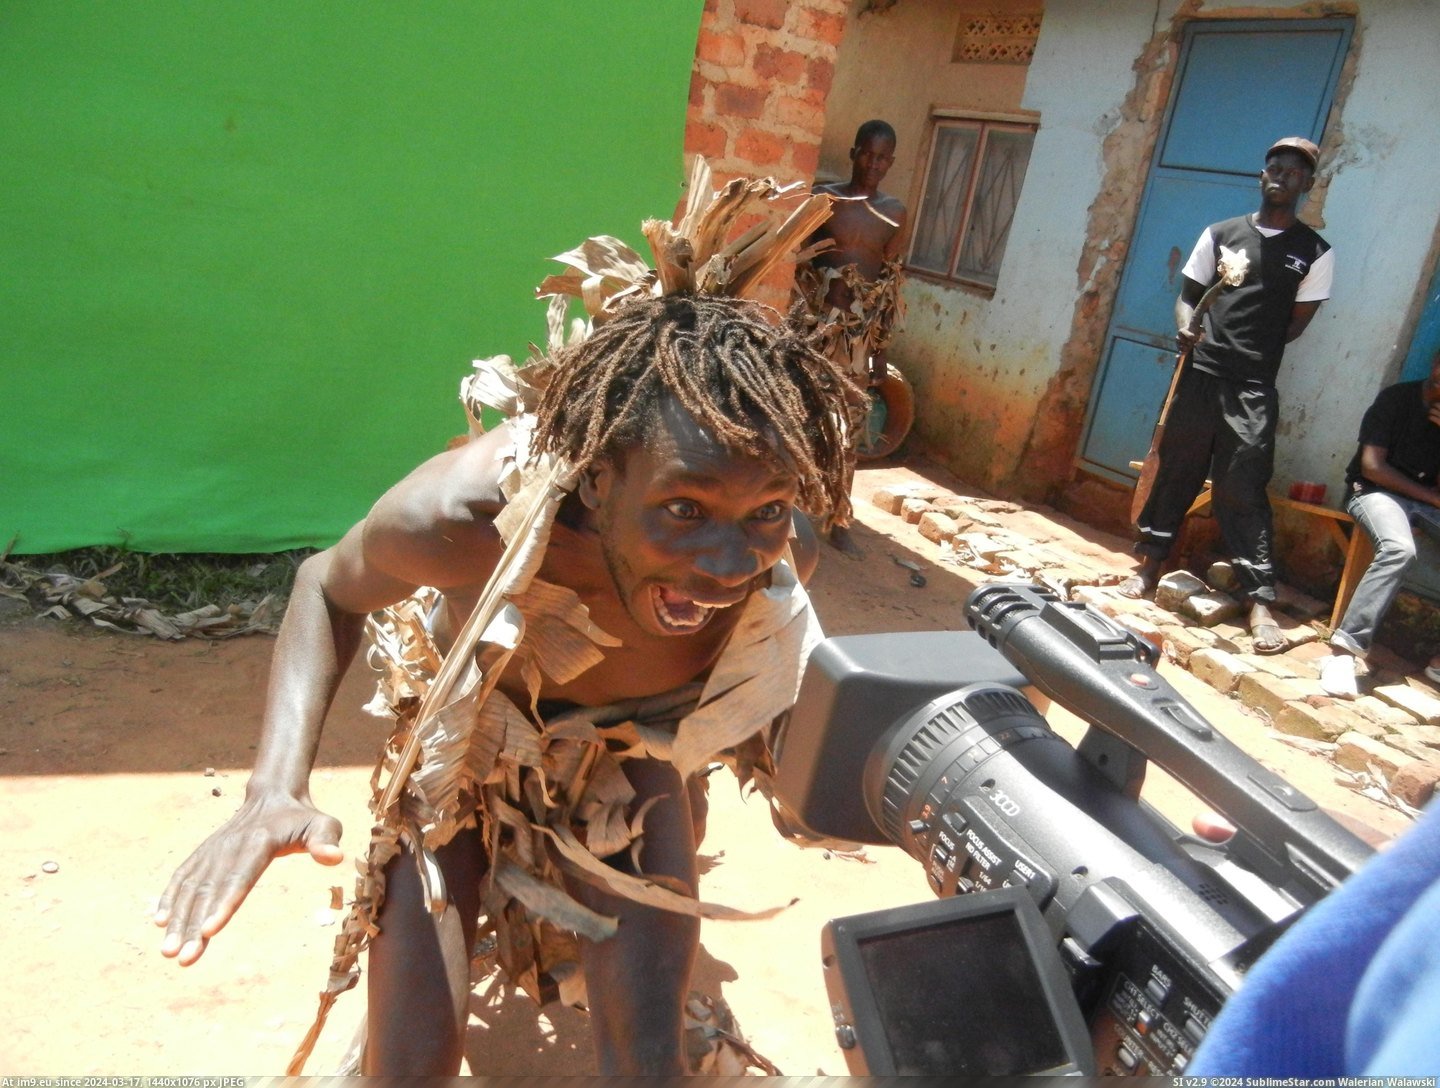 #Months #Living #Spent #Films #Slum #Wakaliwood #Africa #Nyc #Action [Pics] I'm from NYC and spent about 8 months living in a slum in Africa that makes action films (Wakaliwood). Somehow became a U Pic. (Obraz z album My r/PICS favs))